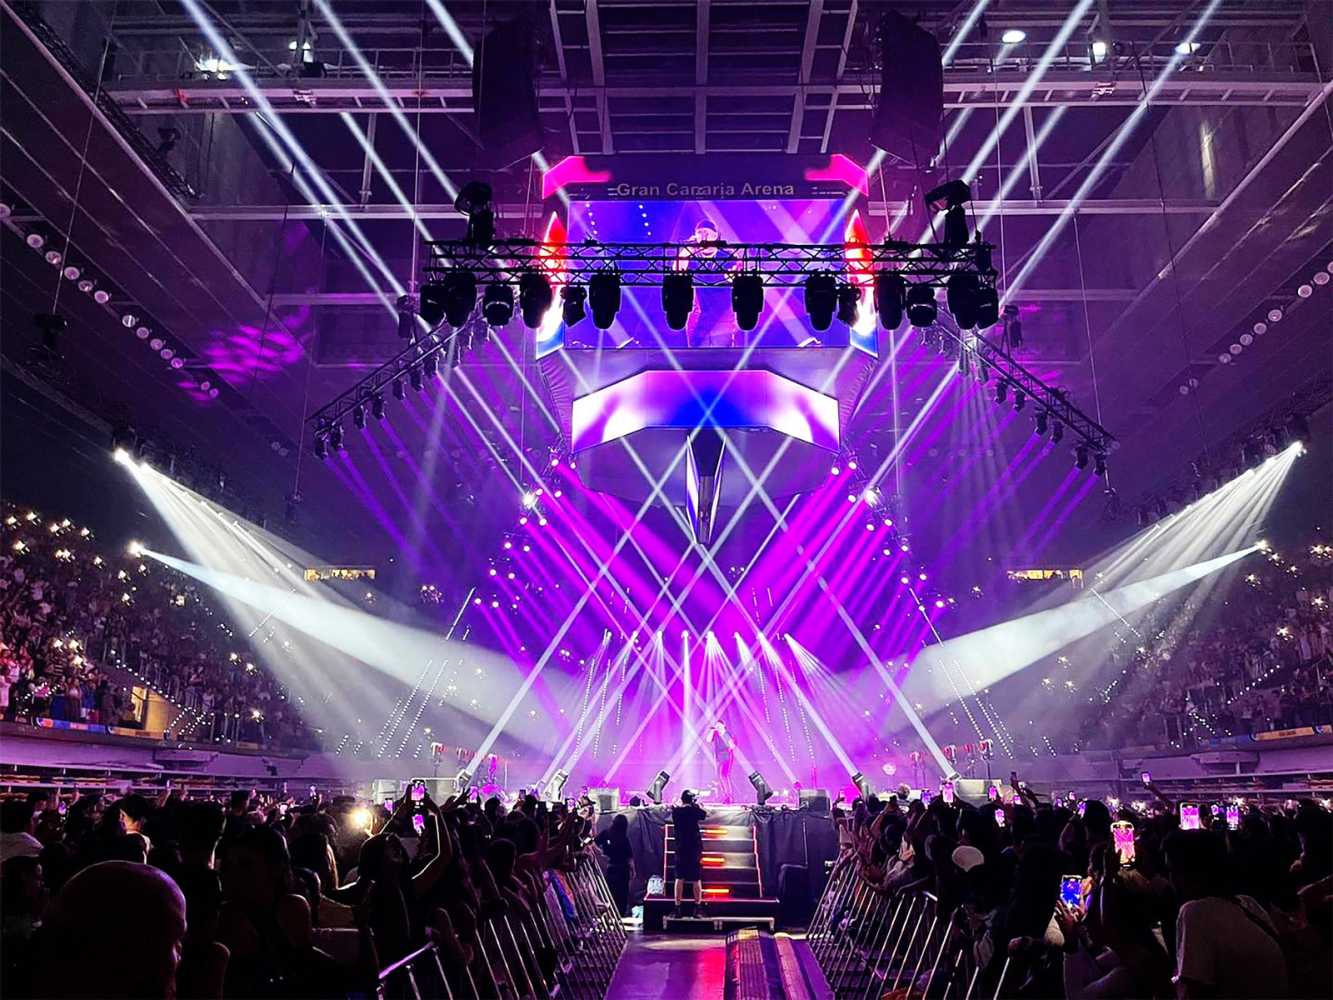 Tour dates included Wizink Centre and the Gran Canaria Arena (photo: USE Sonido)